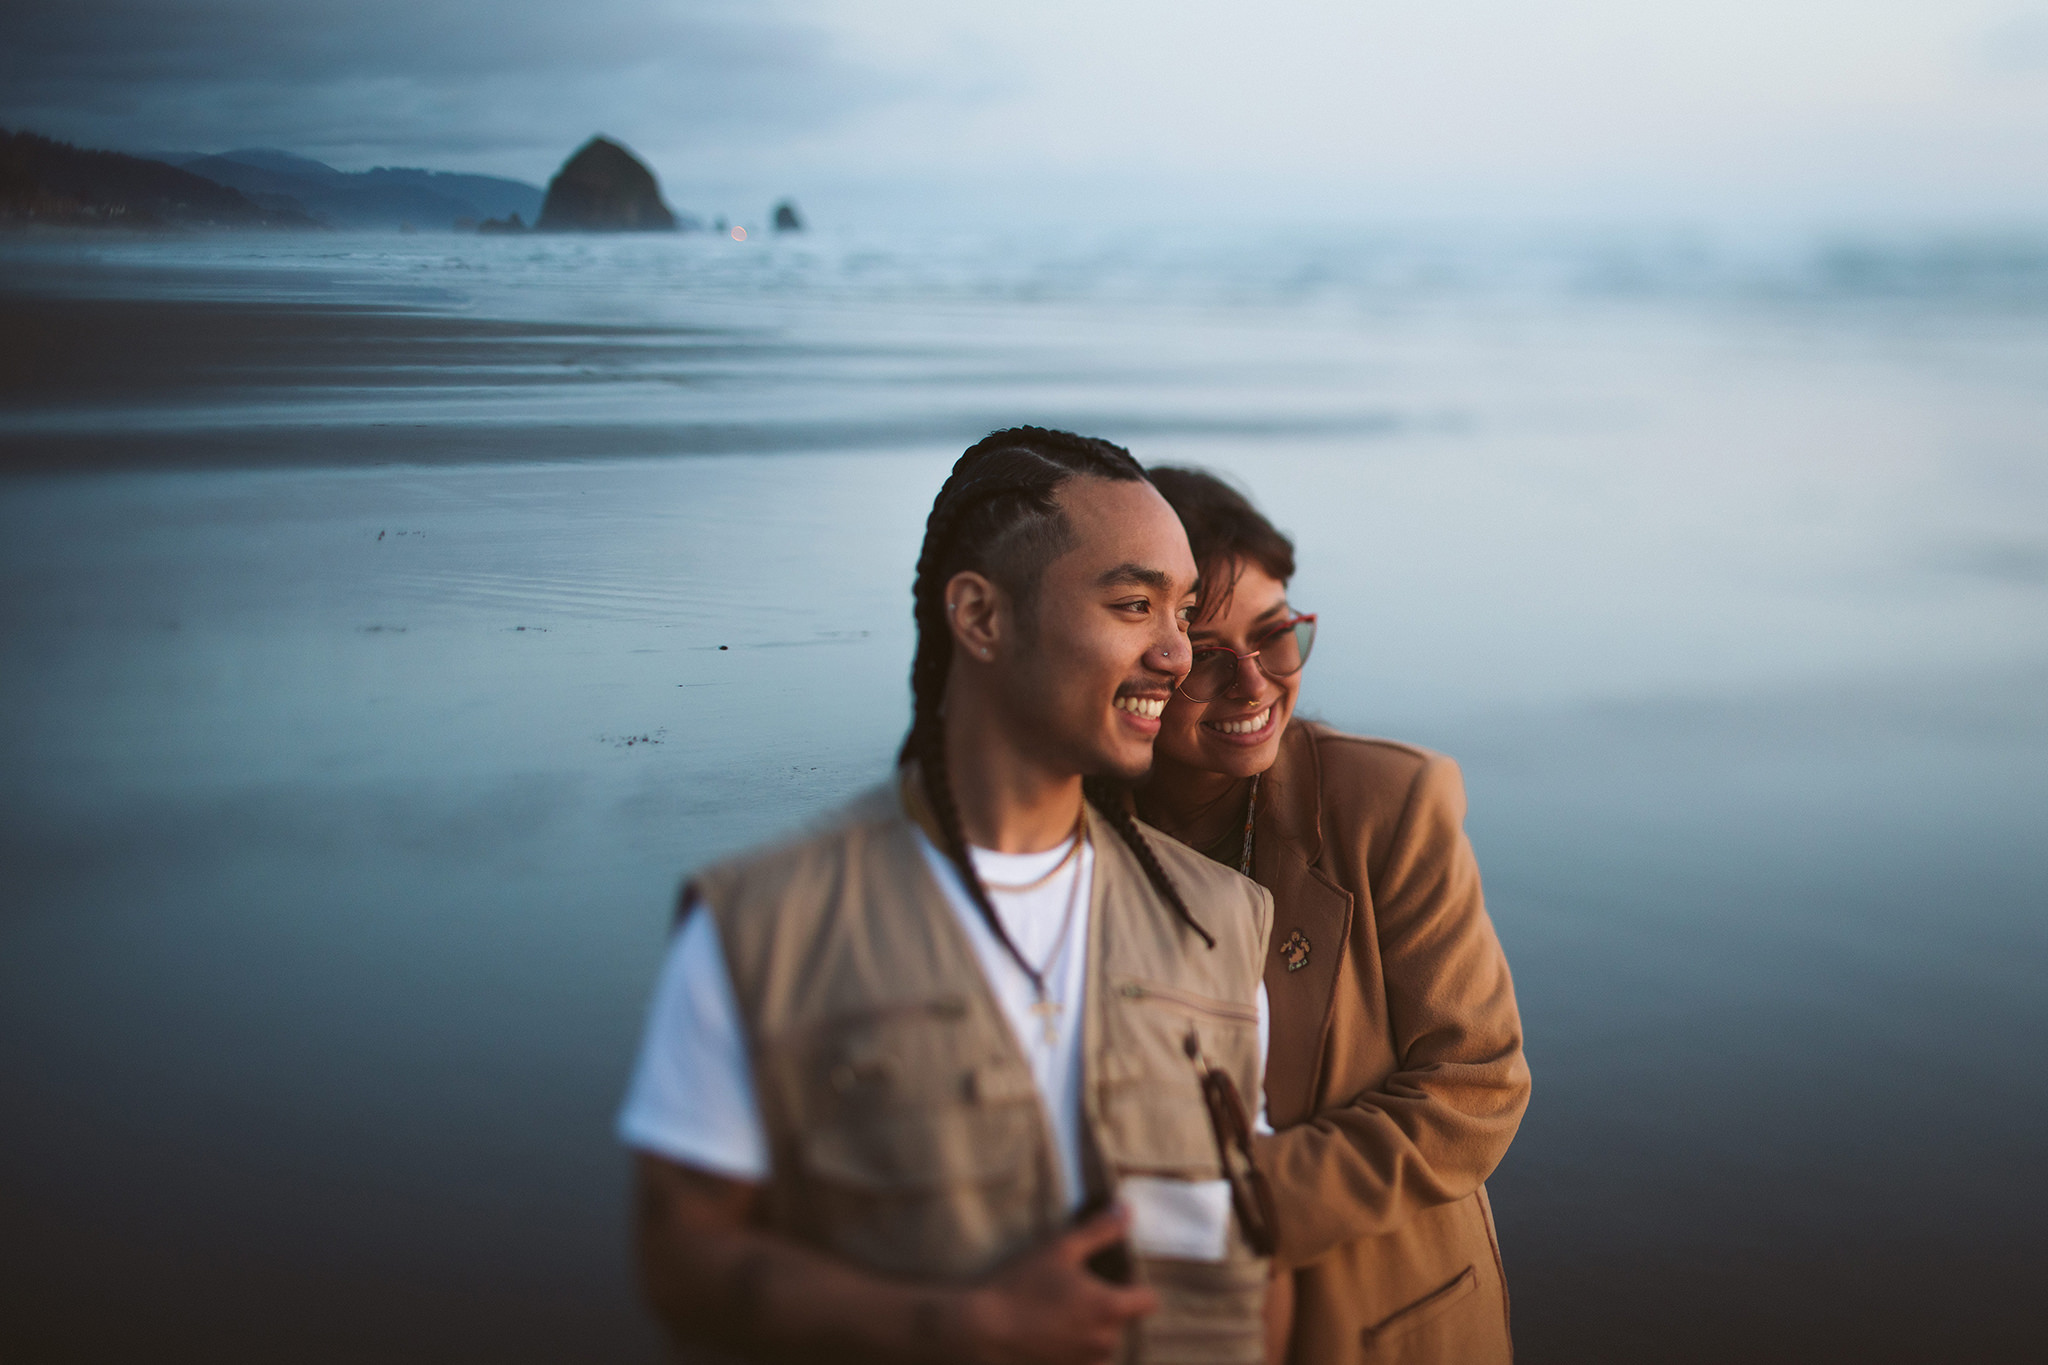 An engagement photo at dusk on Cannon Beach in Oregon